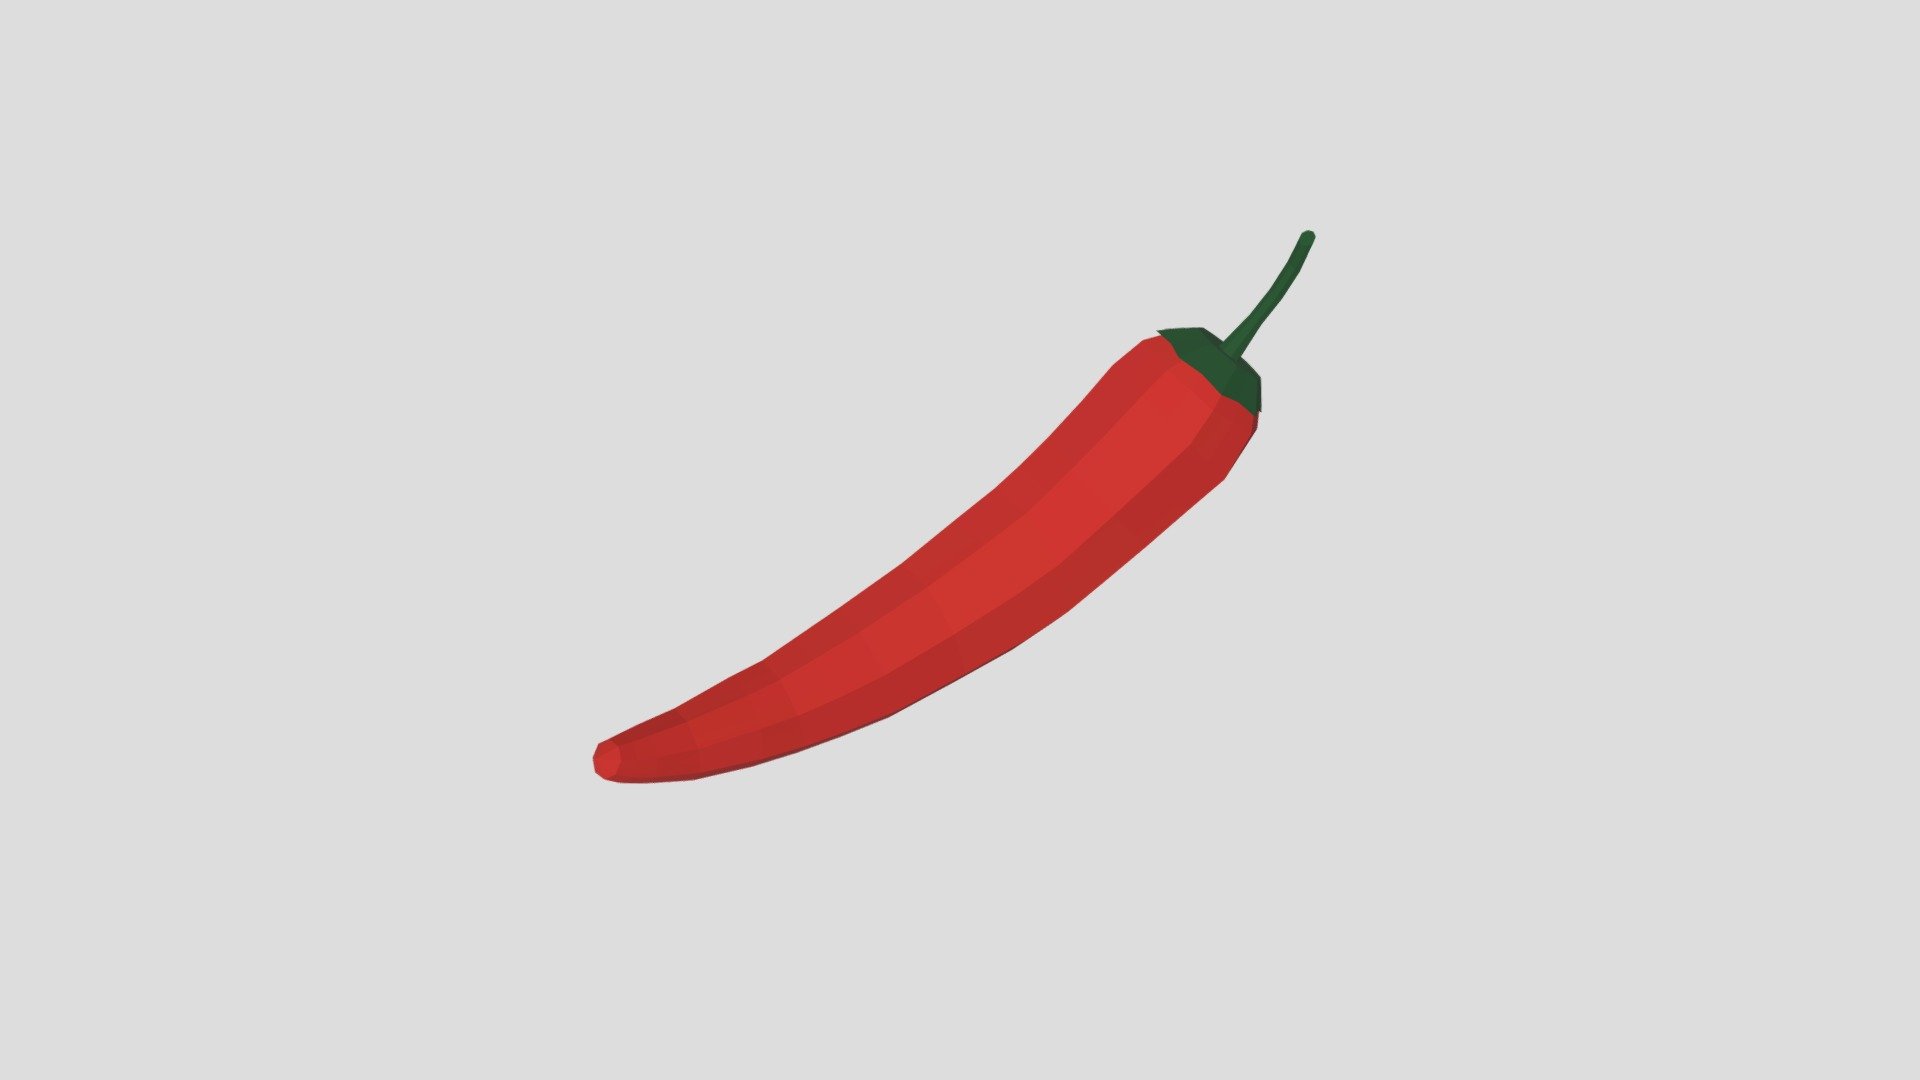 This is a low poly 3d model of a red pepper. The low poly pepper was modelled and prepared for low-poly style renderings, background, general CG visualization presented as a mesh with quads only.

Verts : 406 Faces: 404

This model have simple materials with diffuse colors.

No ring, maps and no UVW mapping is available.

The original file was created in blender. You will receive a 3DS, OBJ, FBX, blend, DAE, Stl.

All preview images were rendered with Blender Cycles. Product is ready to render out-of-the-box. Please note that the lights, cameras, and background is only included in the .blend file. The model is clean and alone in the other provided files, centred at origin and has real-world scale 3d model